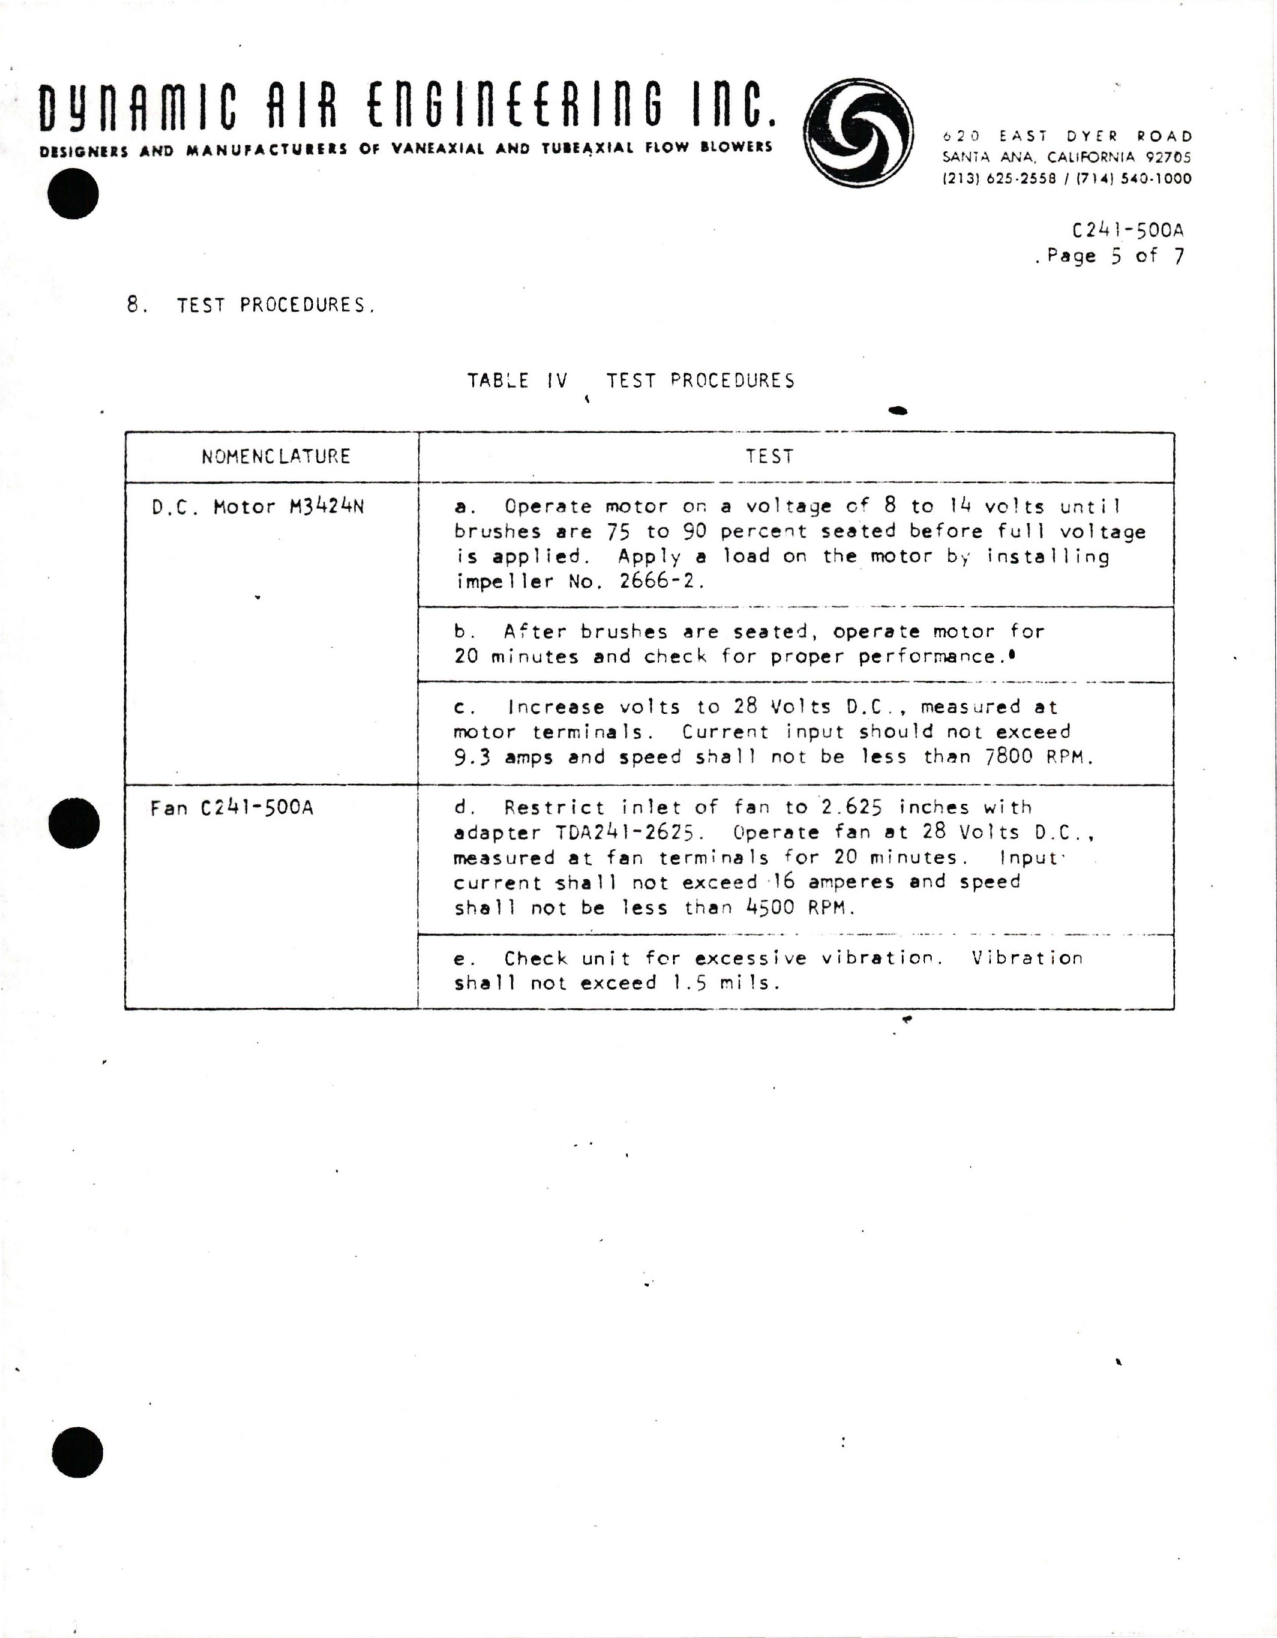 Sample page 5 from AirCorps Library document: Overhaul Instructions for Centrifugal Fan - Part C241-500A - Motor M3424N